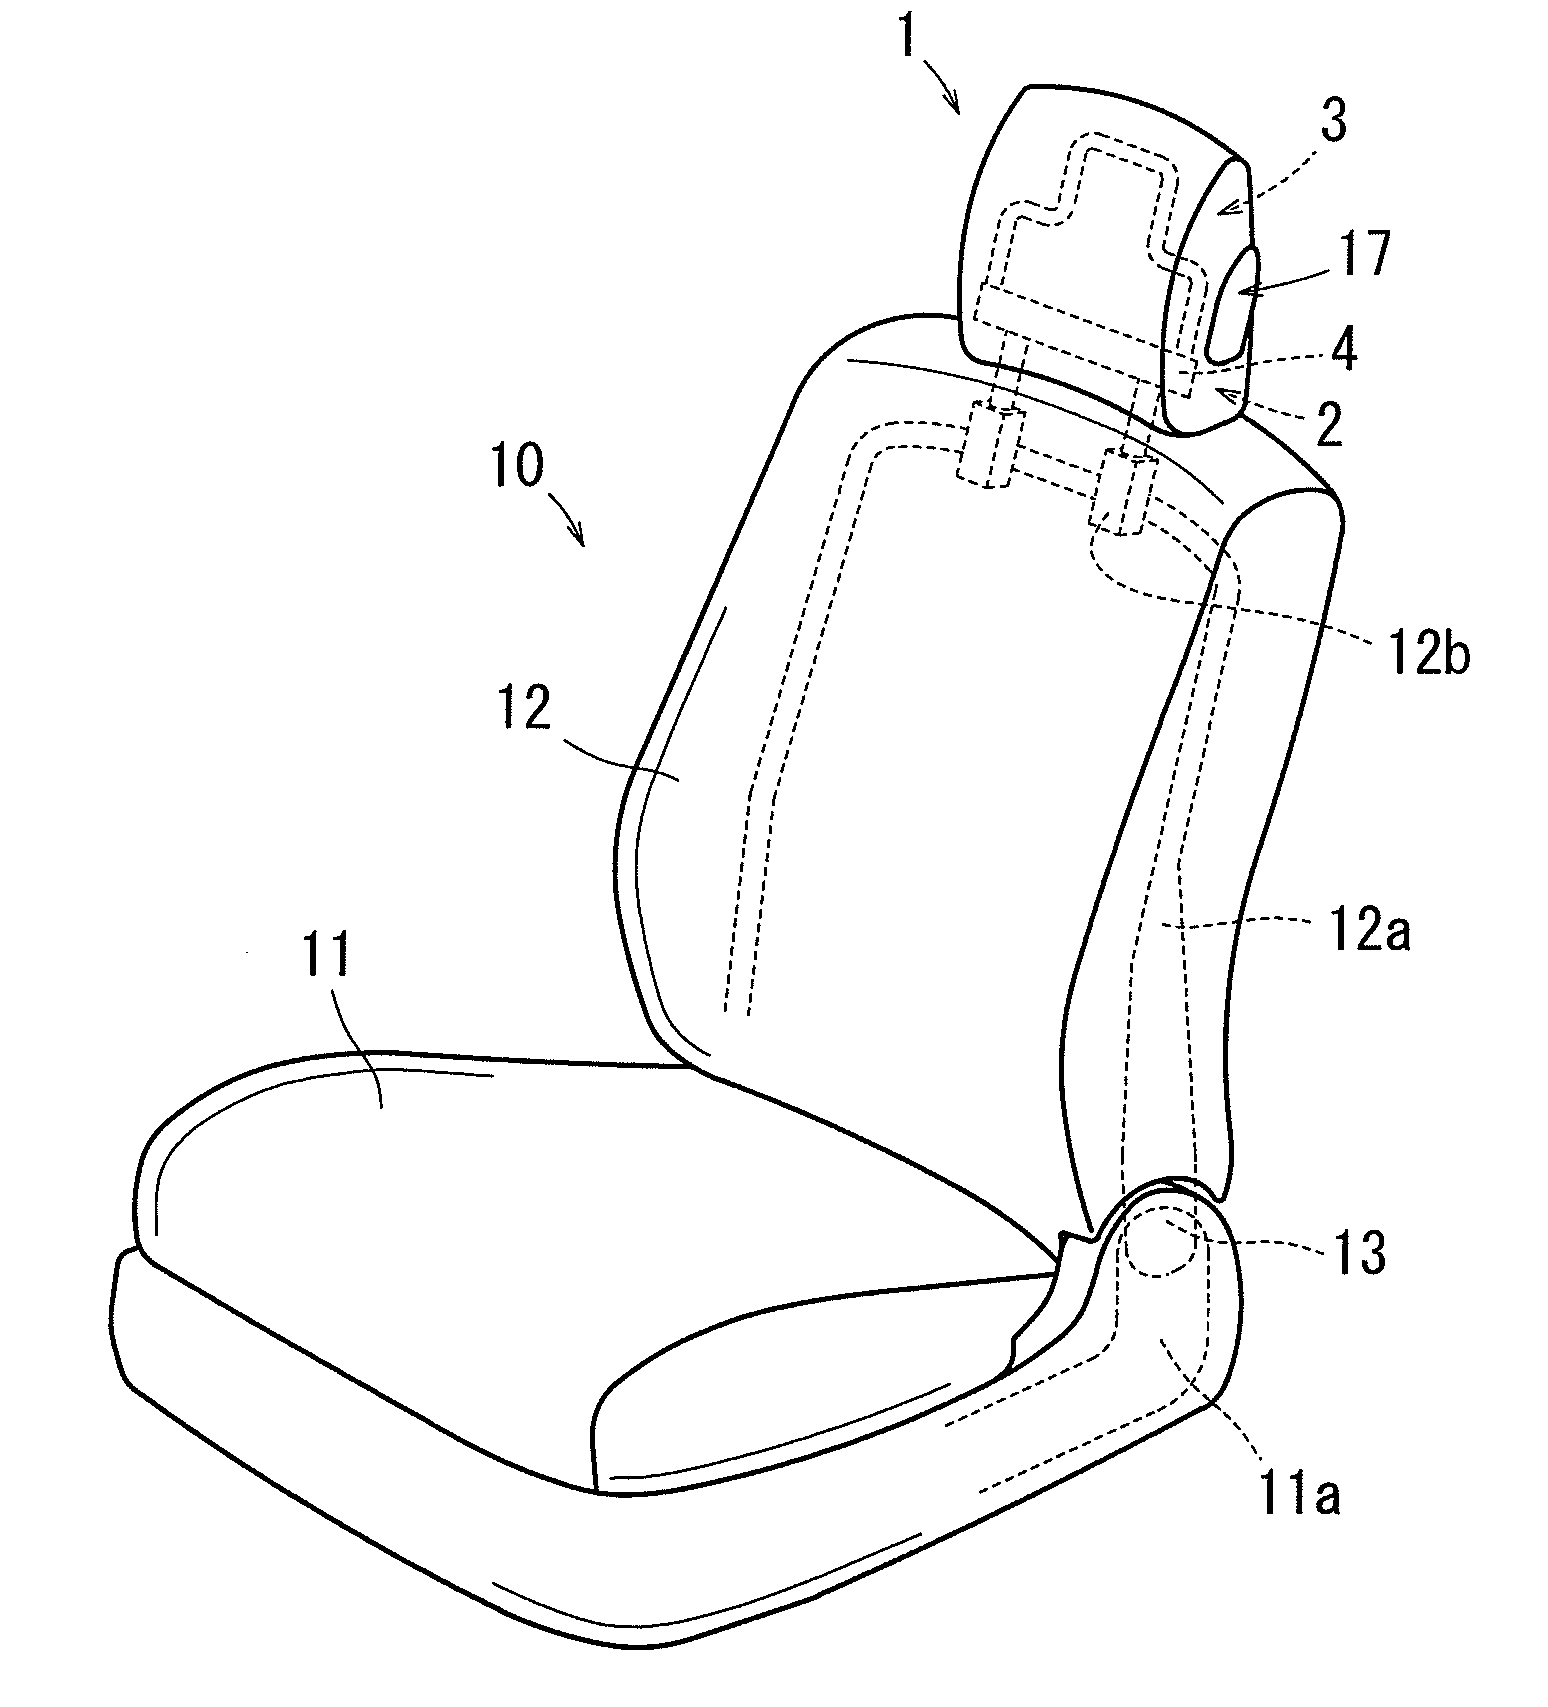 Headrests for vehicle seats